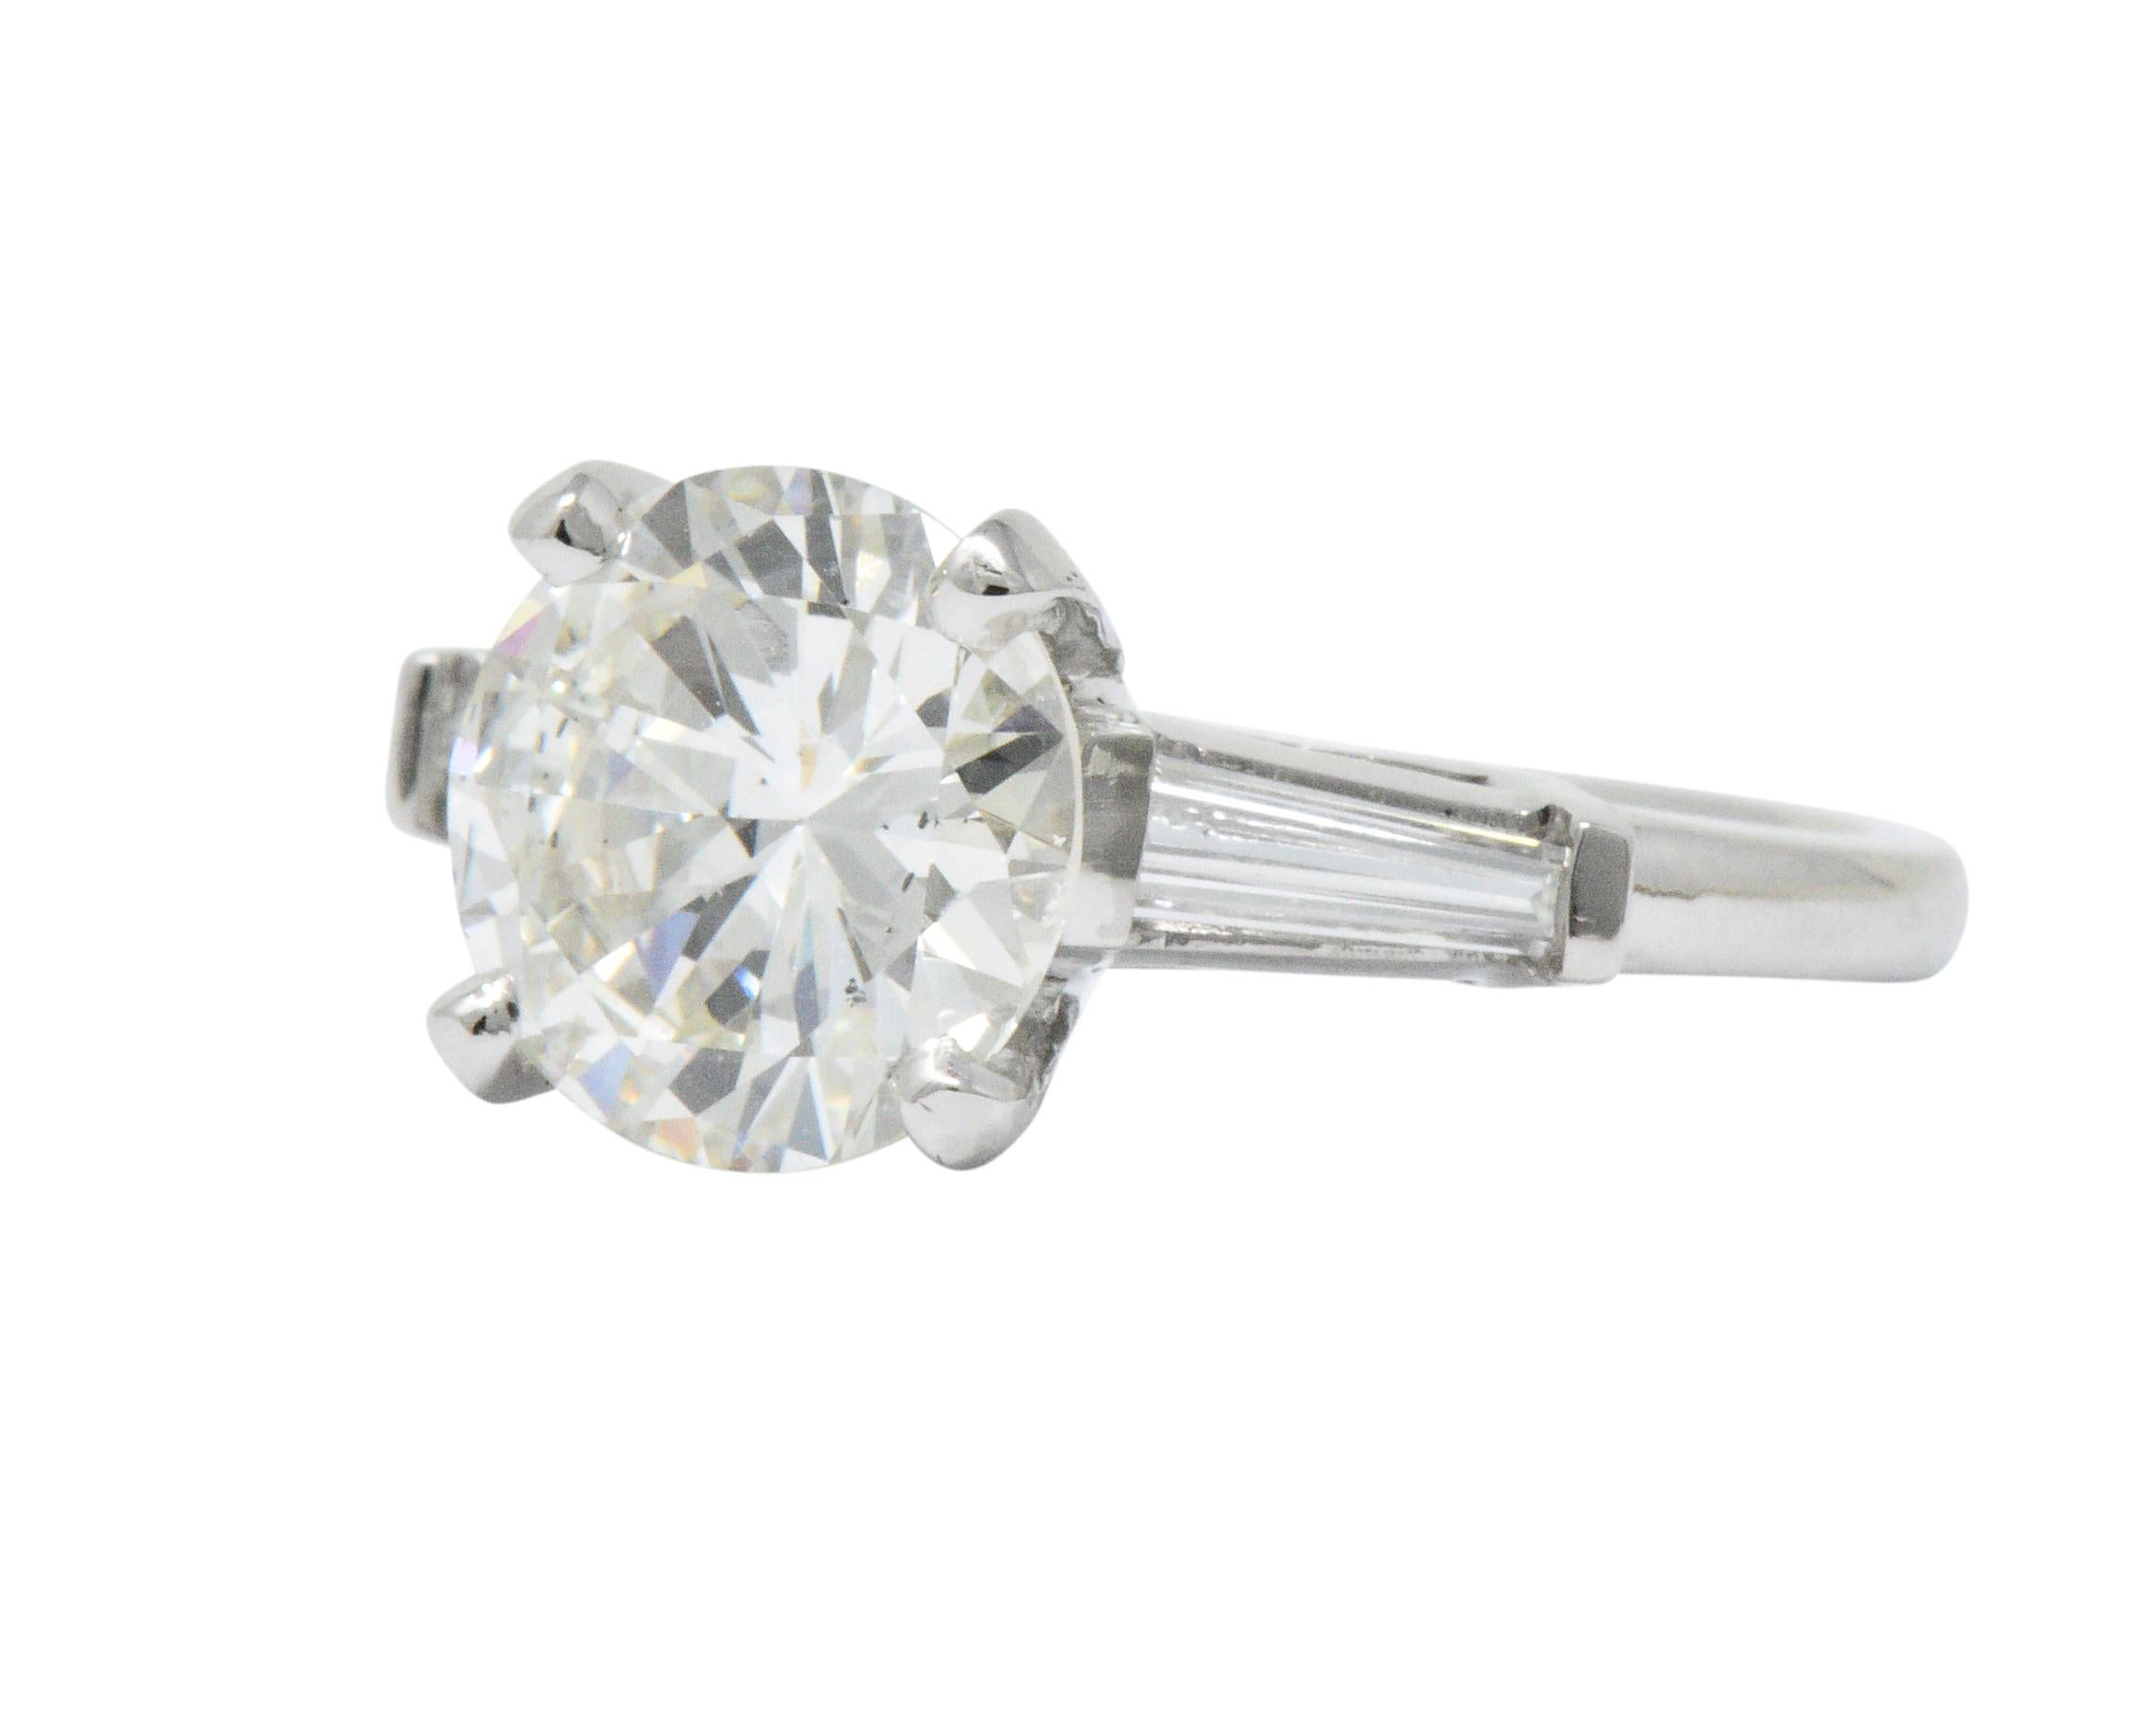 Centering a round brilliant cut diamond weighing 2.36 carats, J color and SI2 clarity

Flanked by tapered baguette cut diamonds, weighing approximately 0.35 carat total, G/H color and VS clarity

Classic cathedral style setting

Ring Size: 5 &